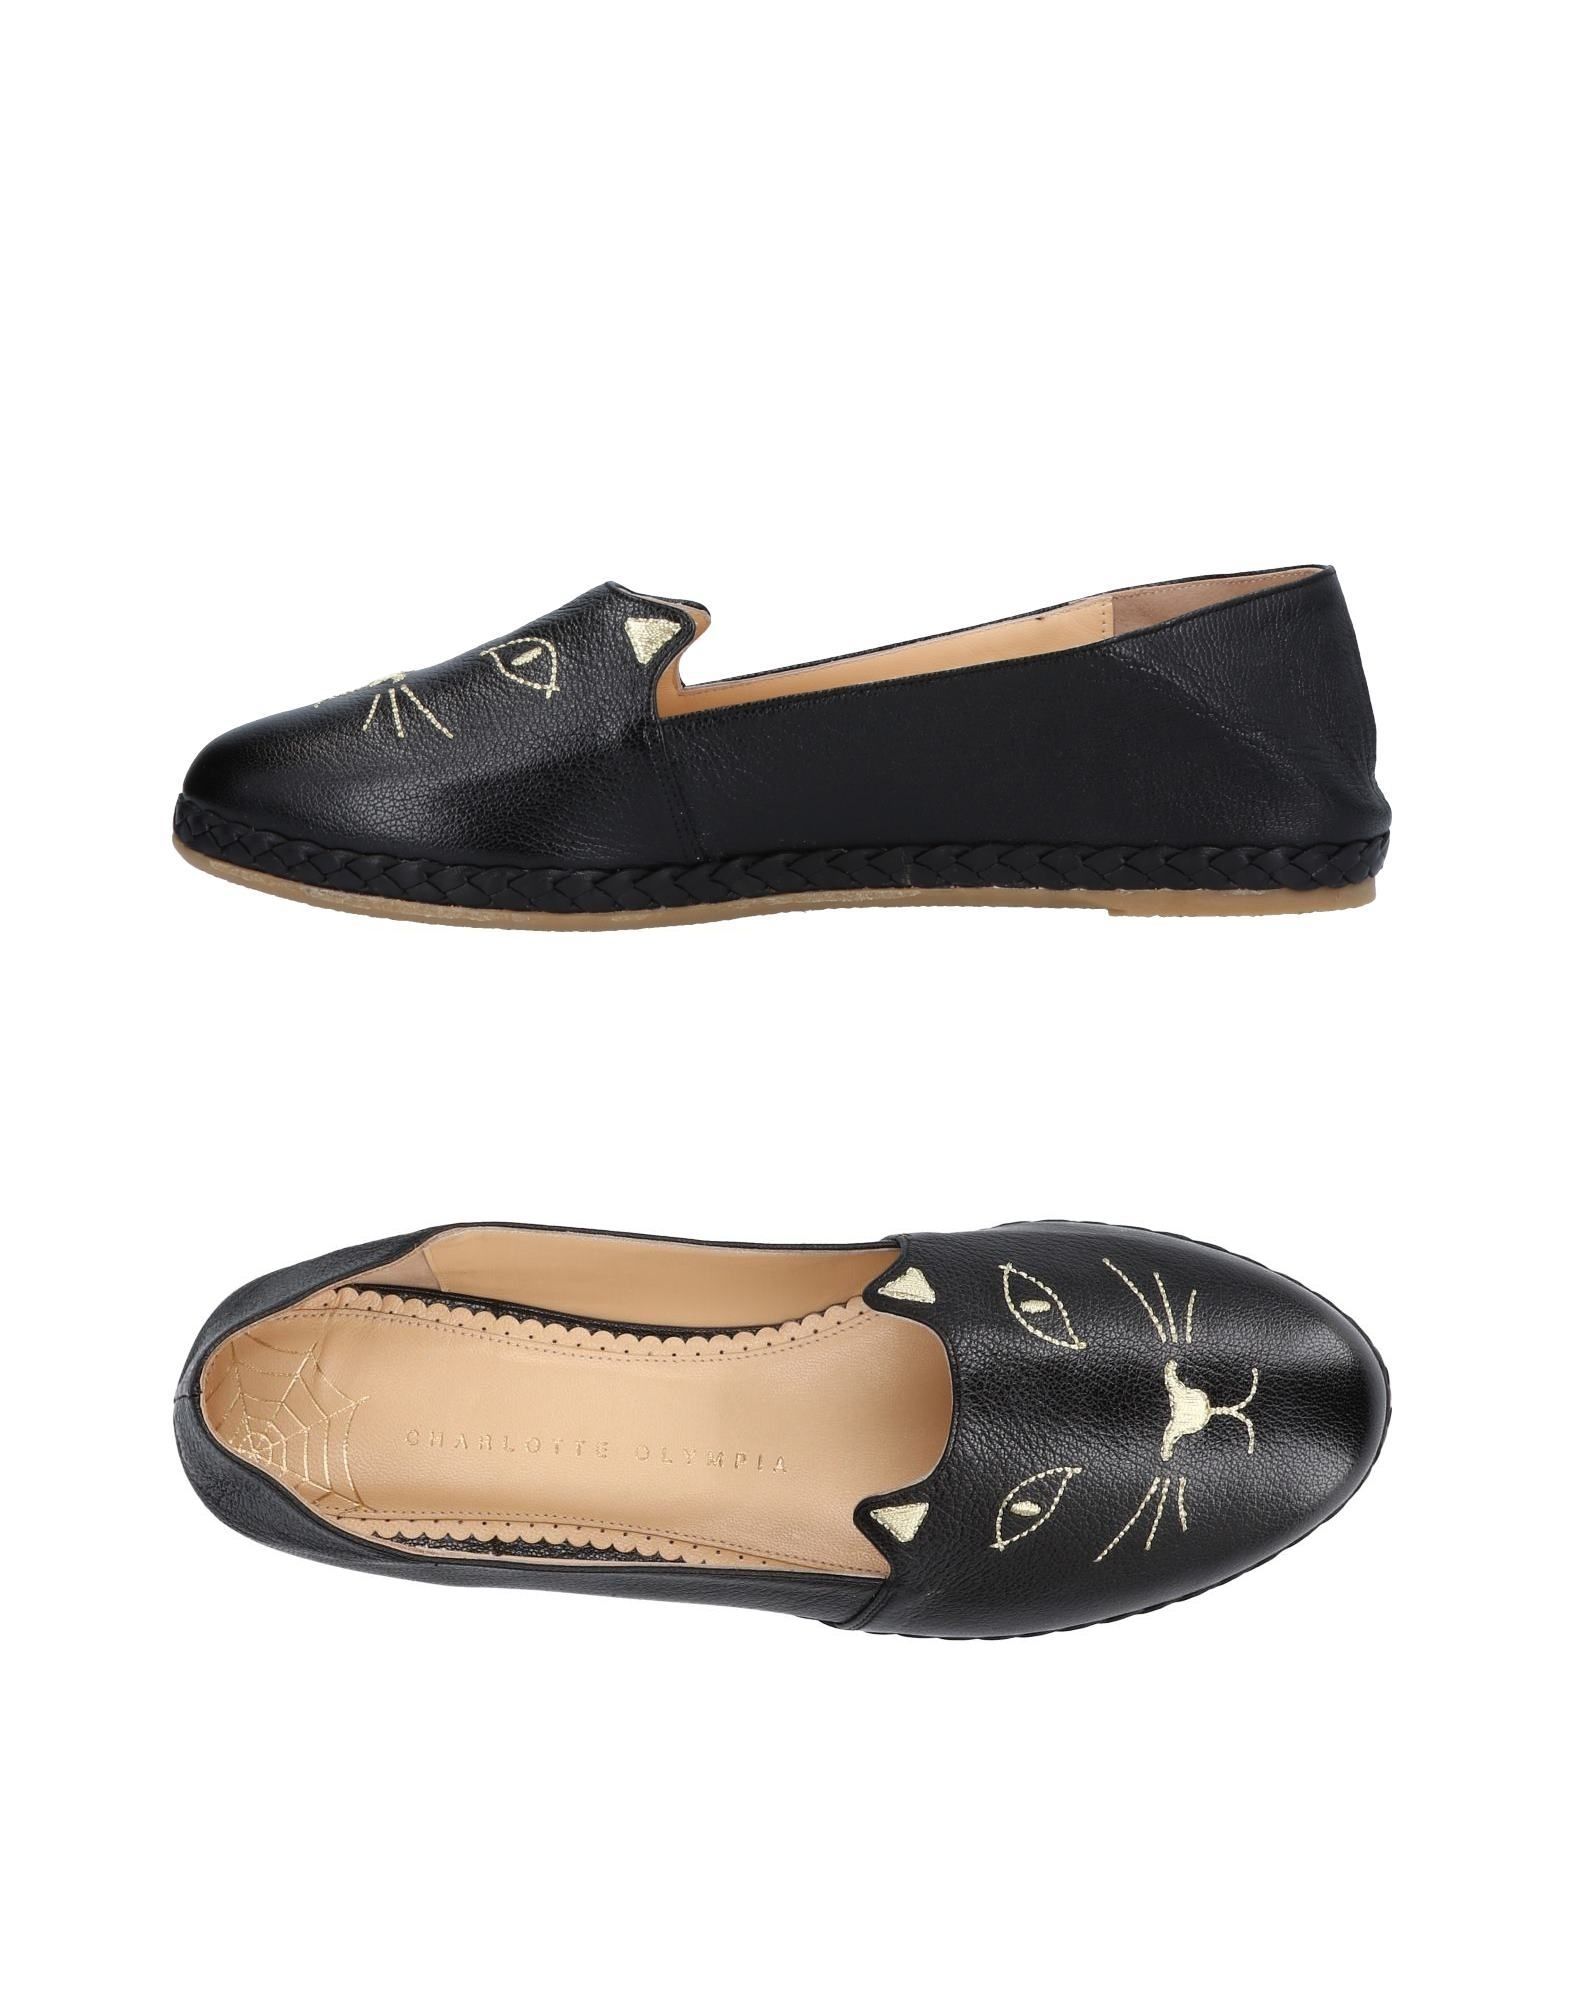 CHARLOTTE OLYMPIA CHARLOTTE OLYMPIA WOMAN BALLET FLATS BLACK SIZE 7 SOFT LEATHER,11463687BK 7